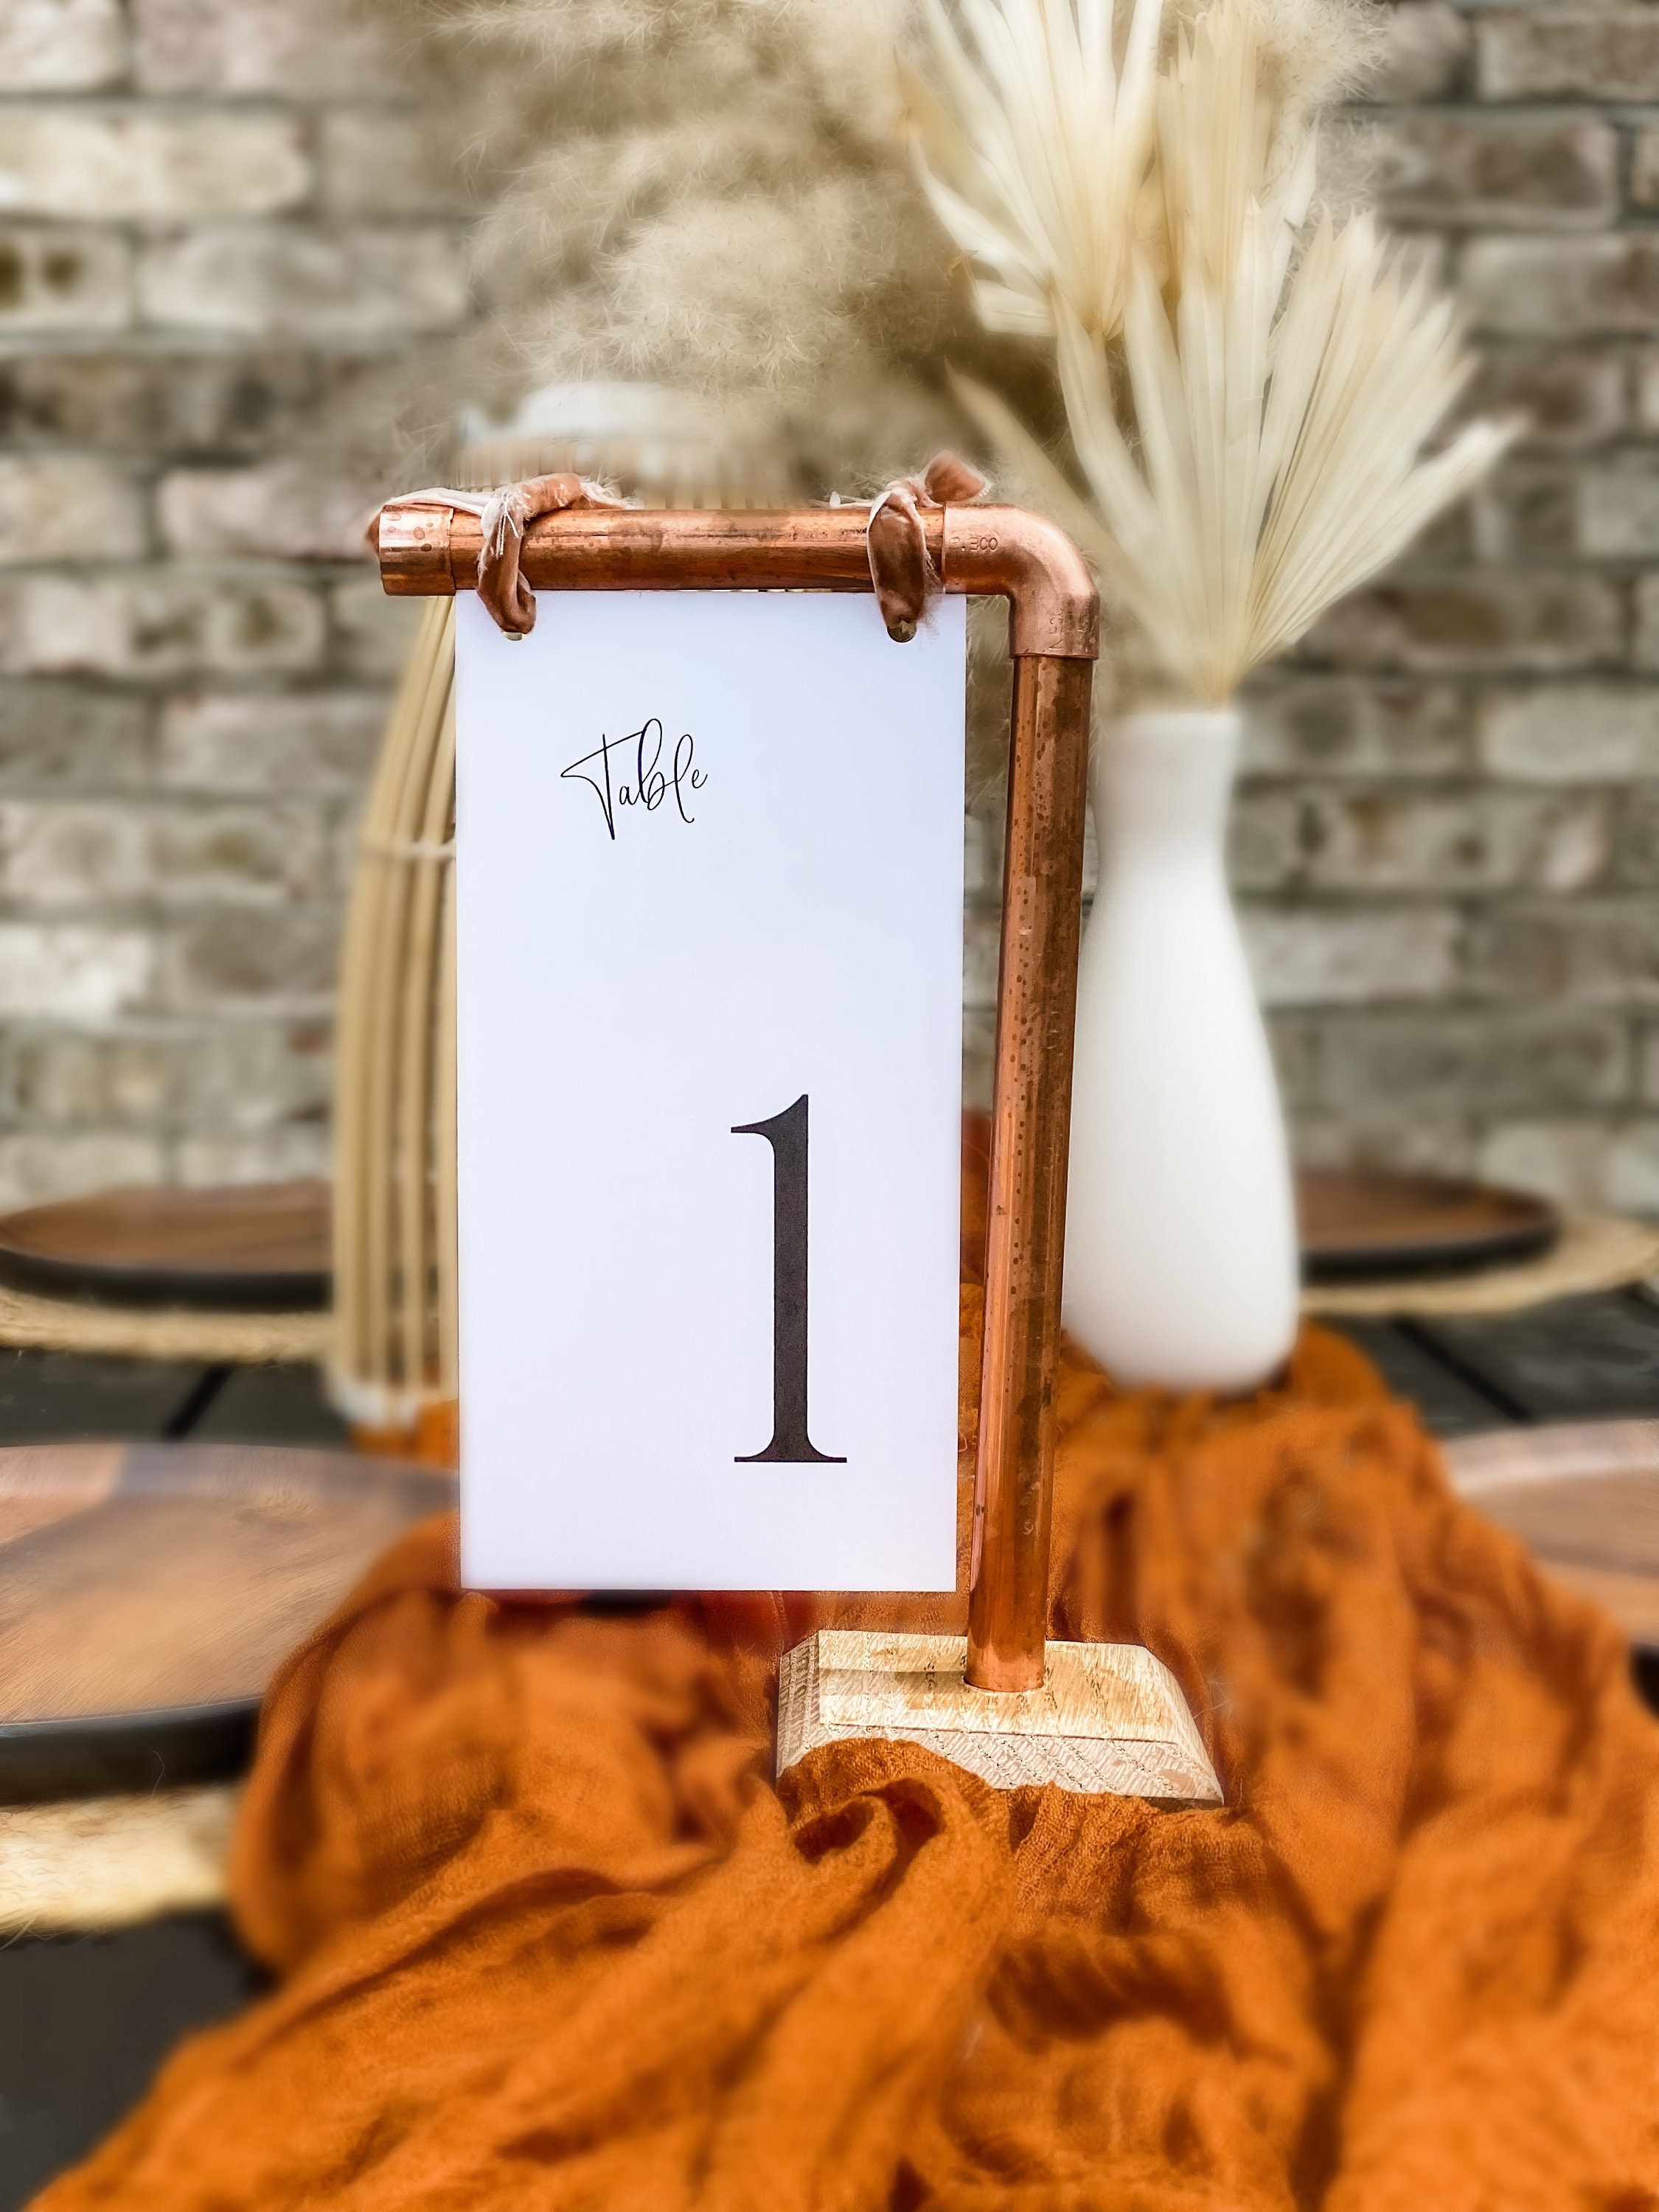 Copper & Wood Wedding Sign Stand Copper and Wood Table Number Stand Menu  Copper Sign Holder Rustic Table Center Piece Boho Wedding 